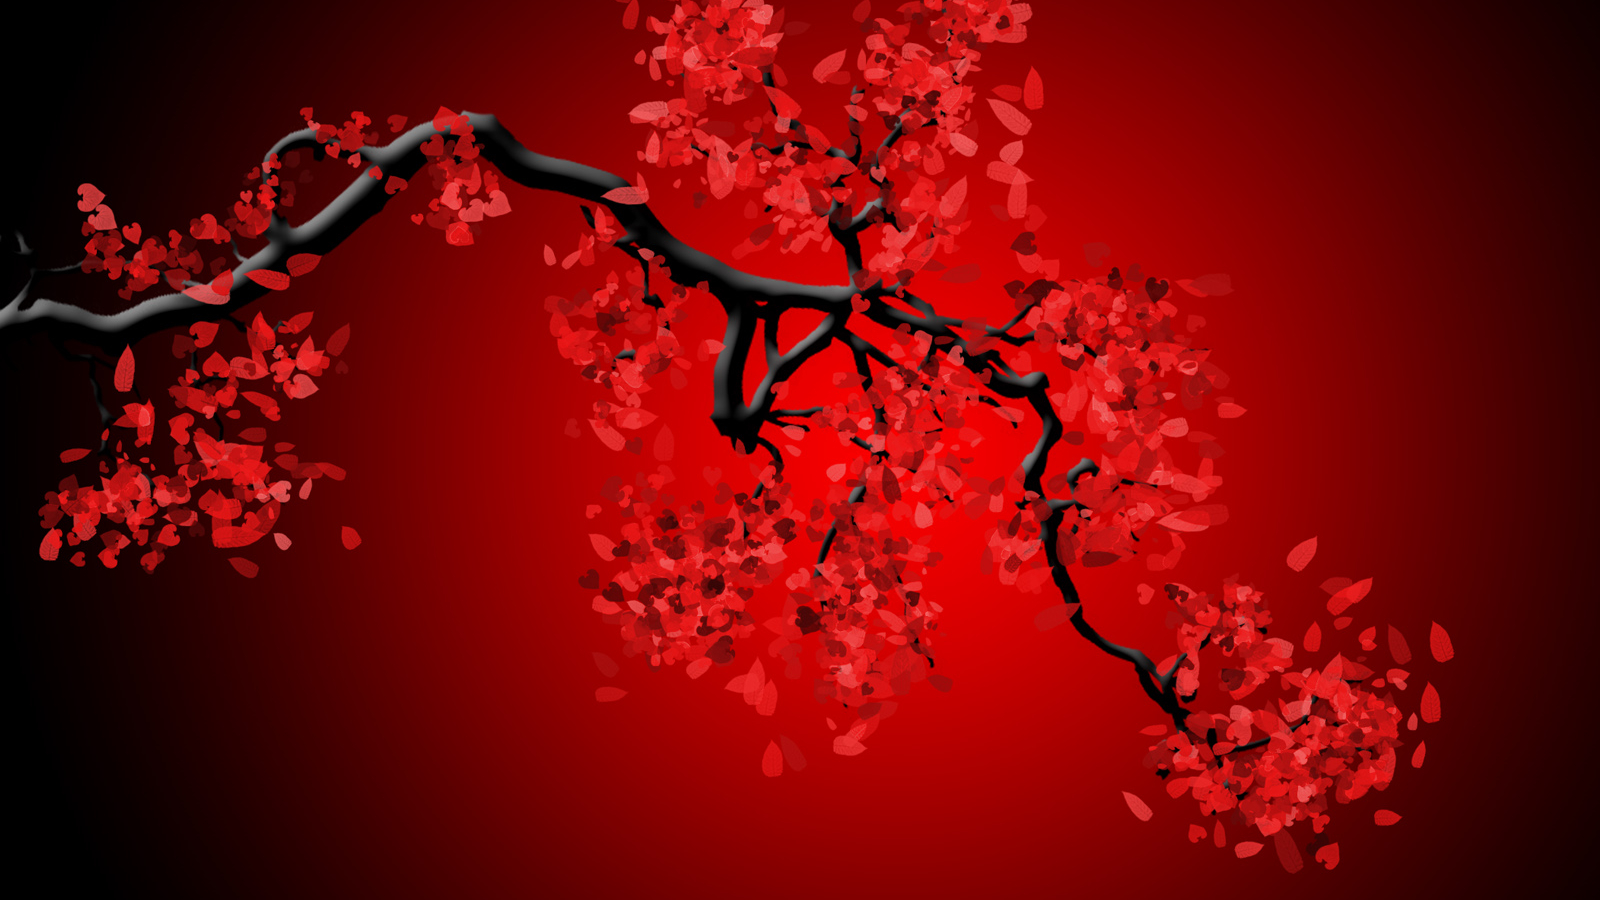 Cherry Blossom Red And Black Wallpaper